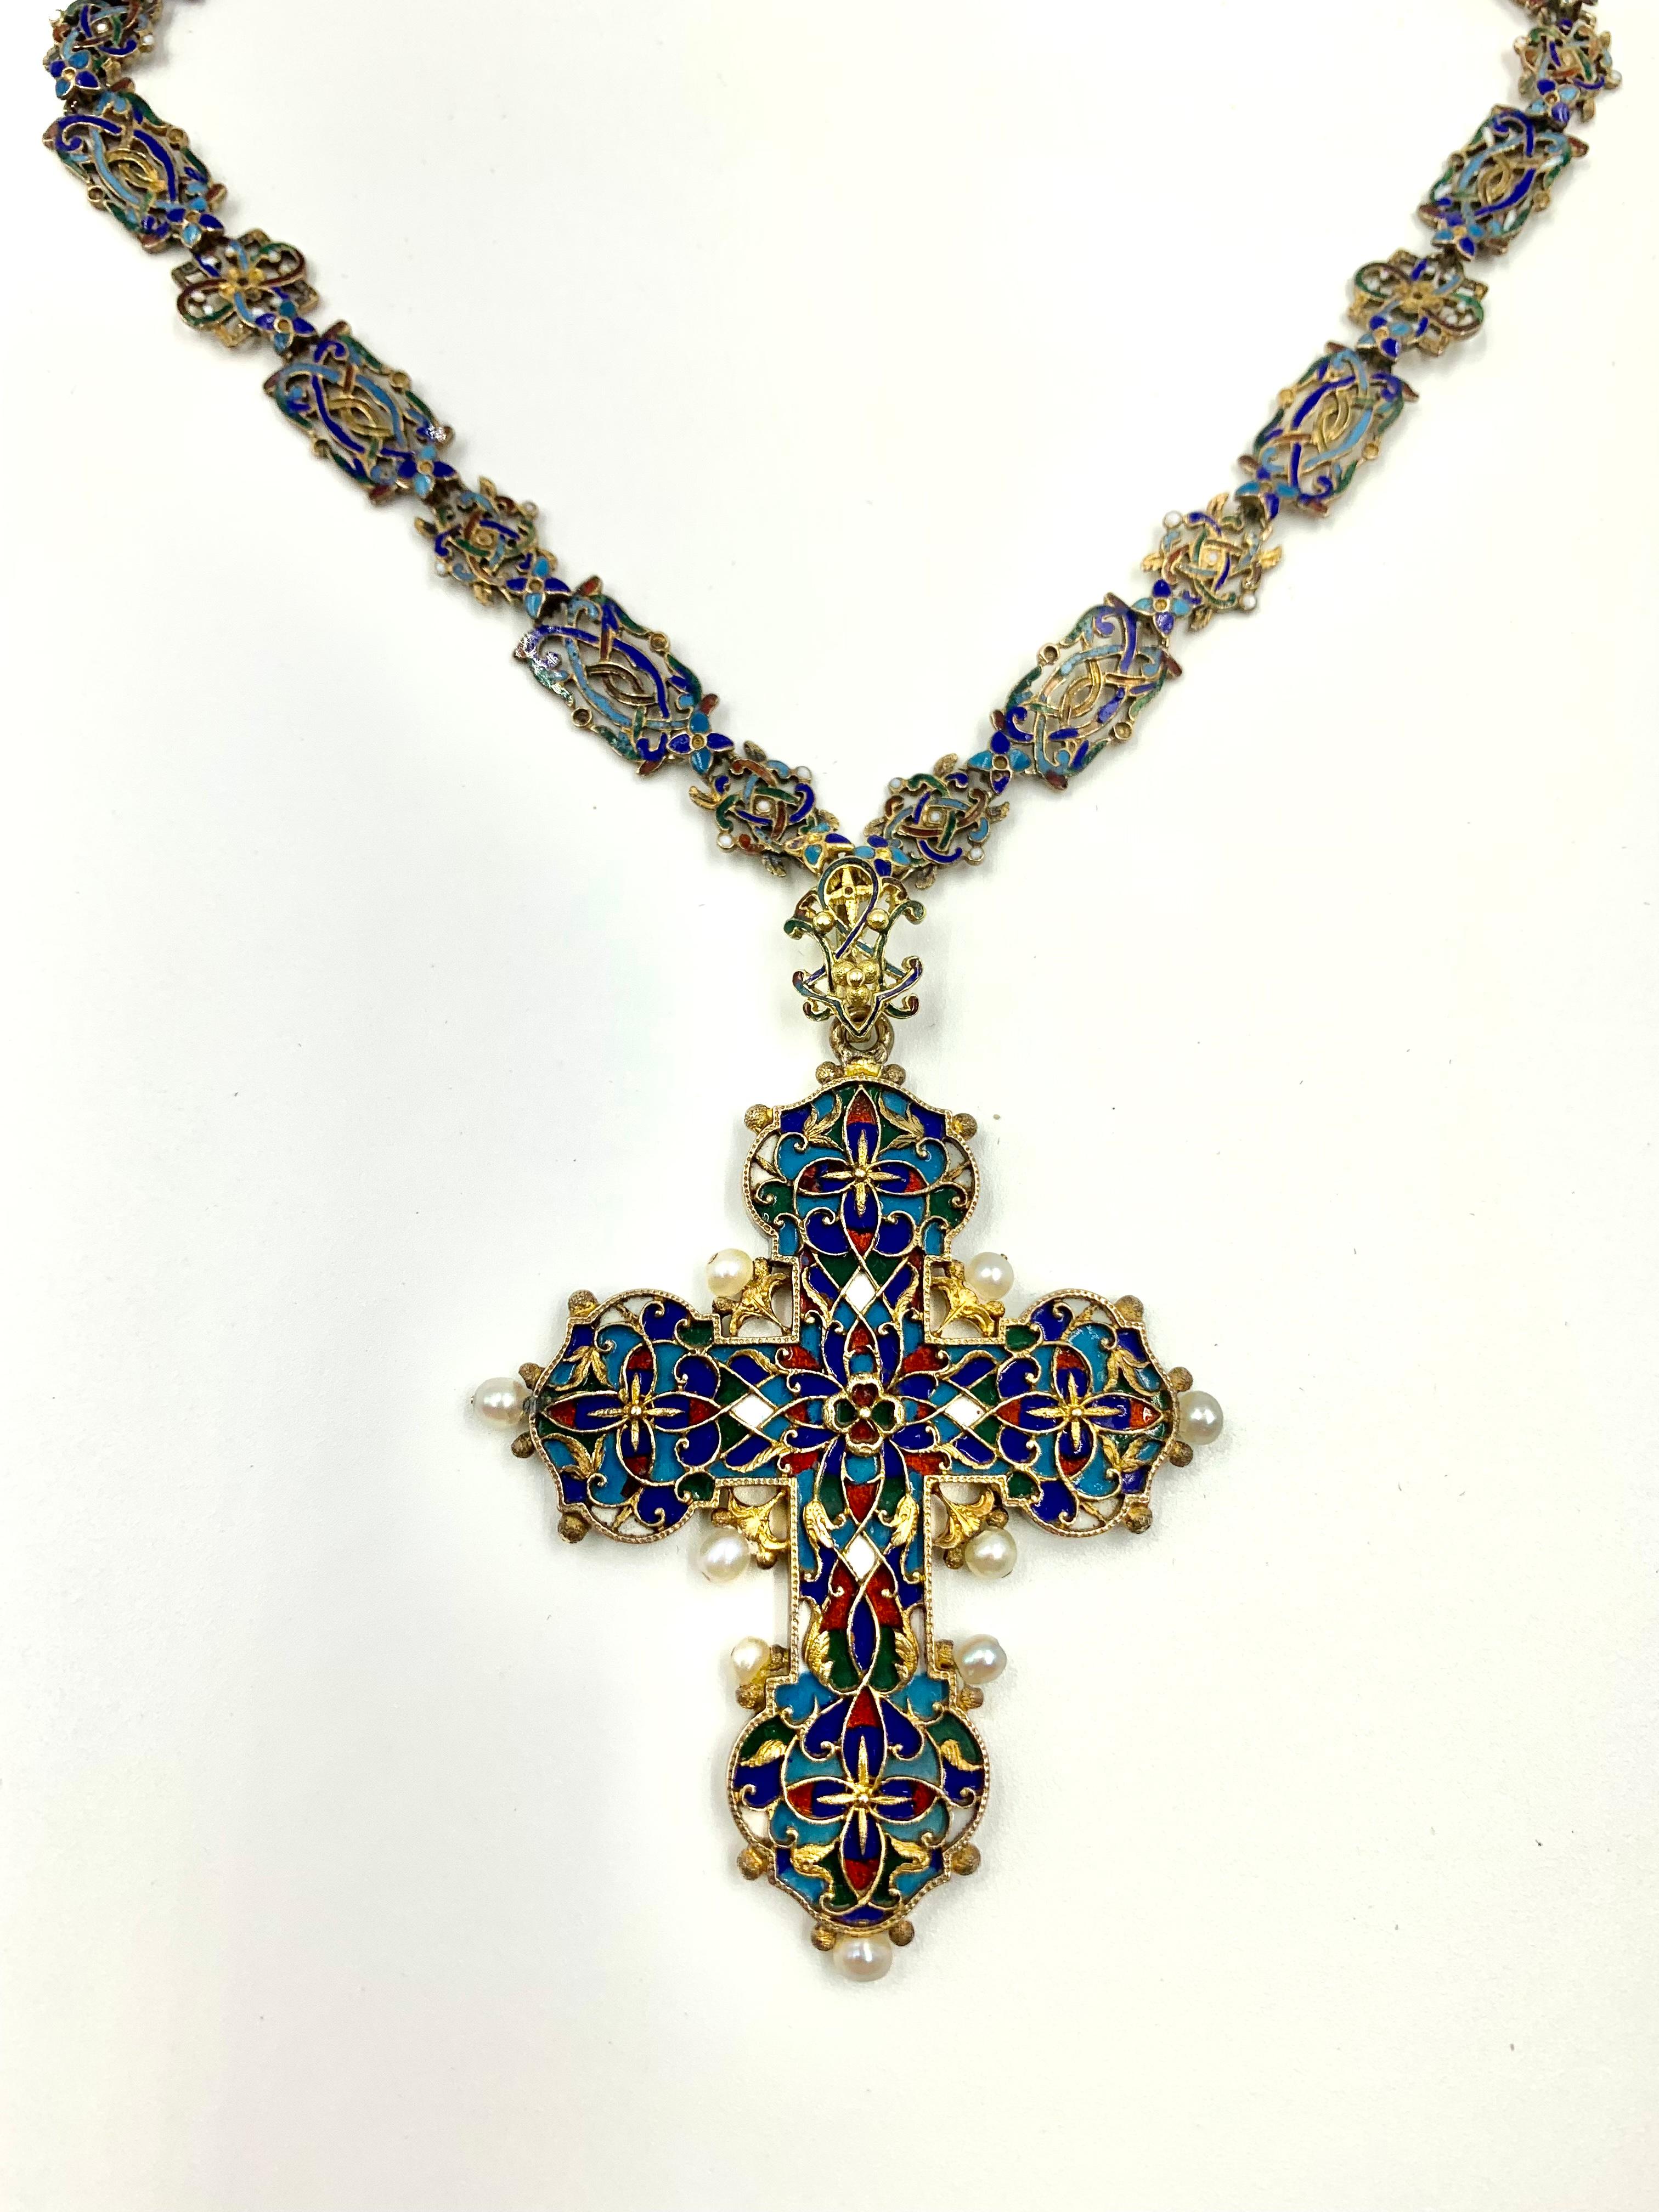 Antique Renaissance Revival Polychrome Enamel, Pearl 14K Gold Cross Necklace In Good Condition For Sale In New York, NY